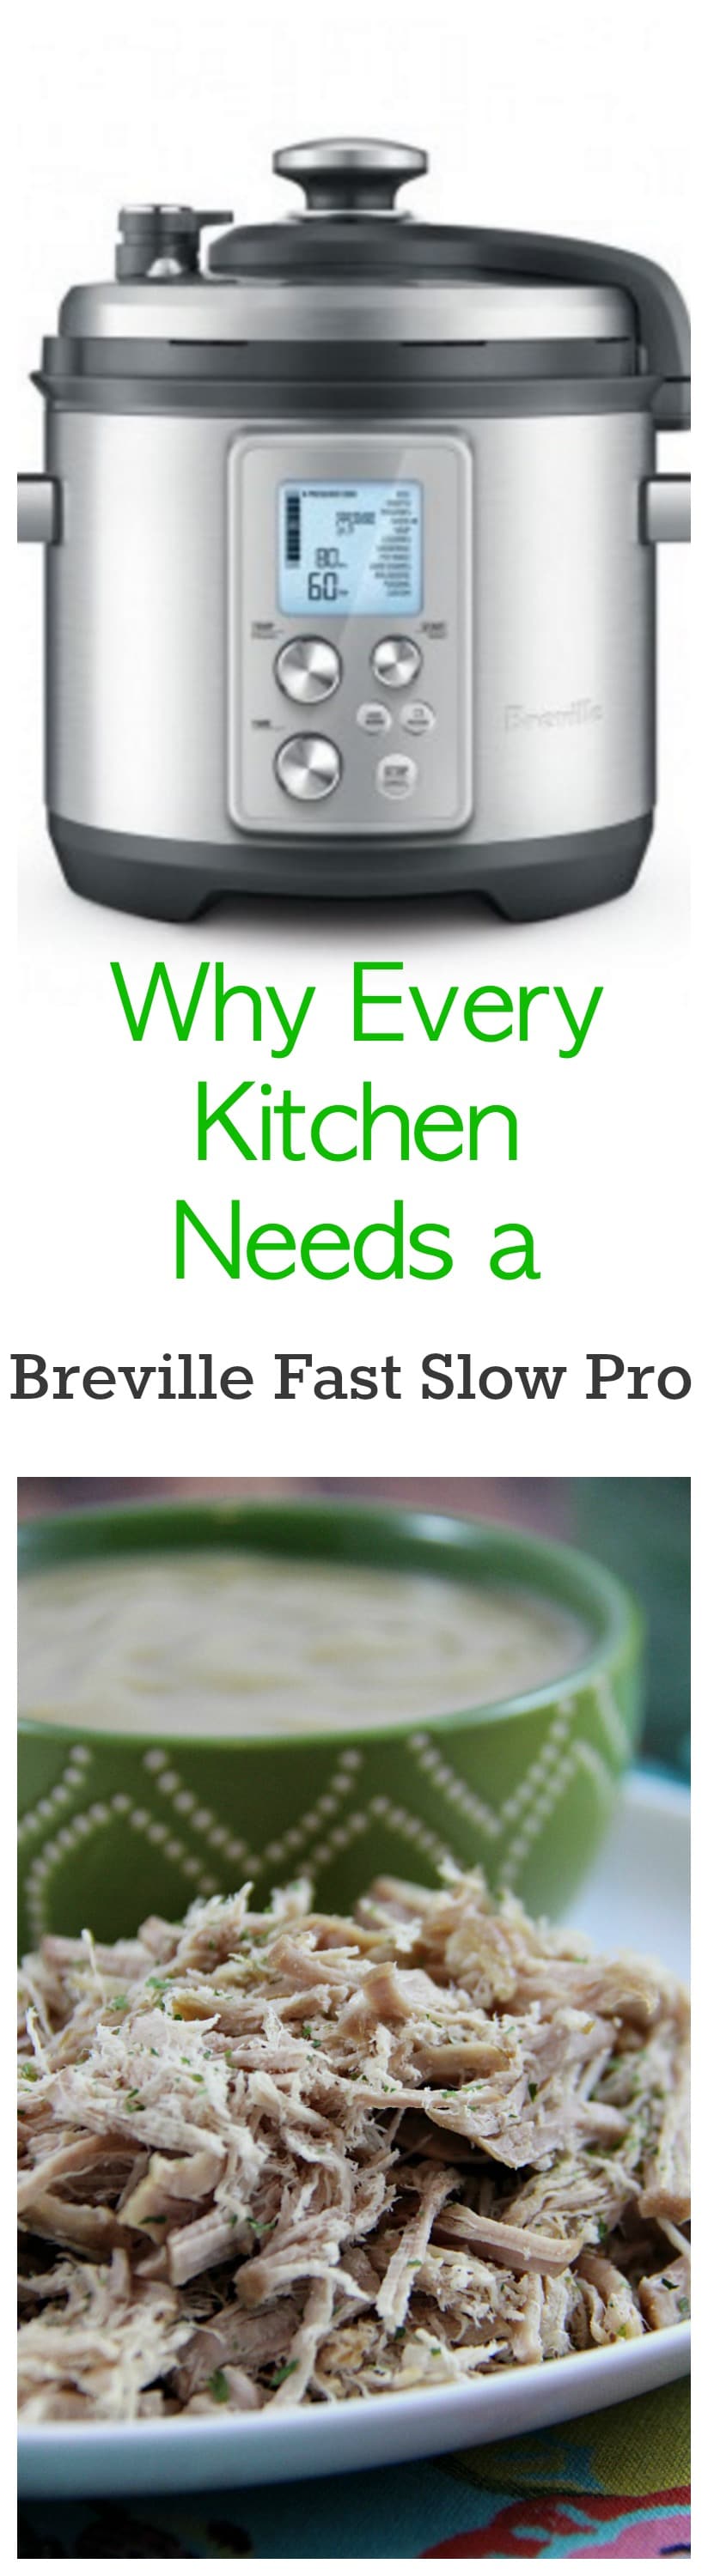 Why Every Kitchen Needs s Breville Fast Slow Pro 